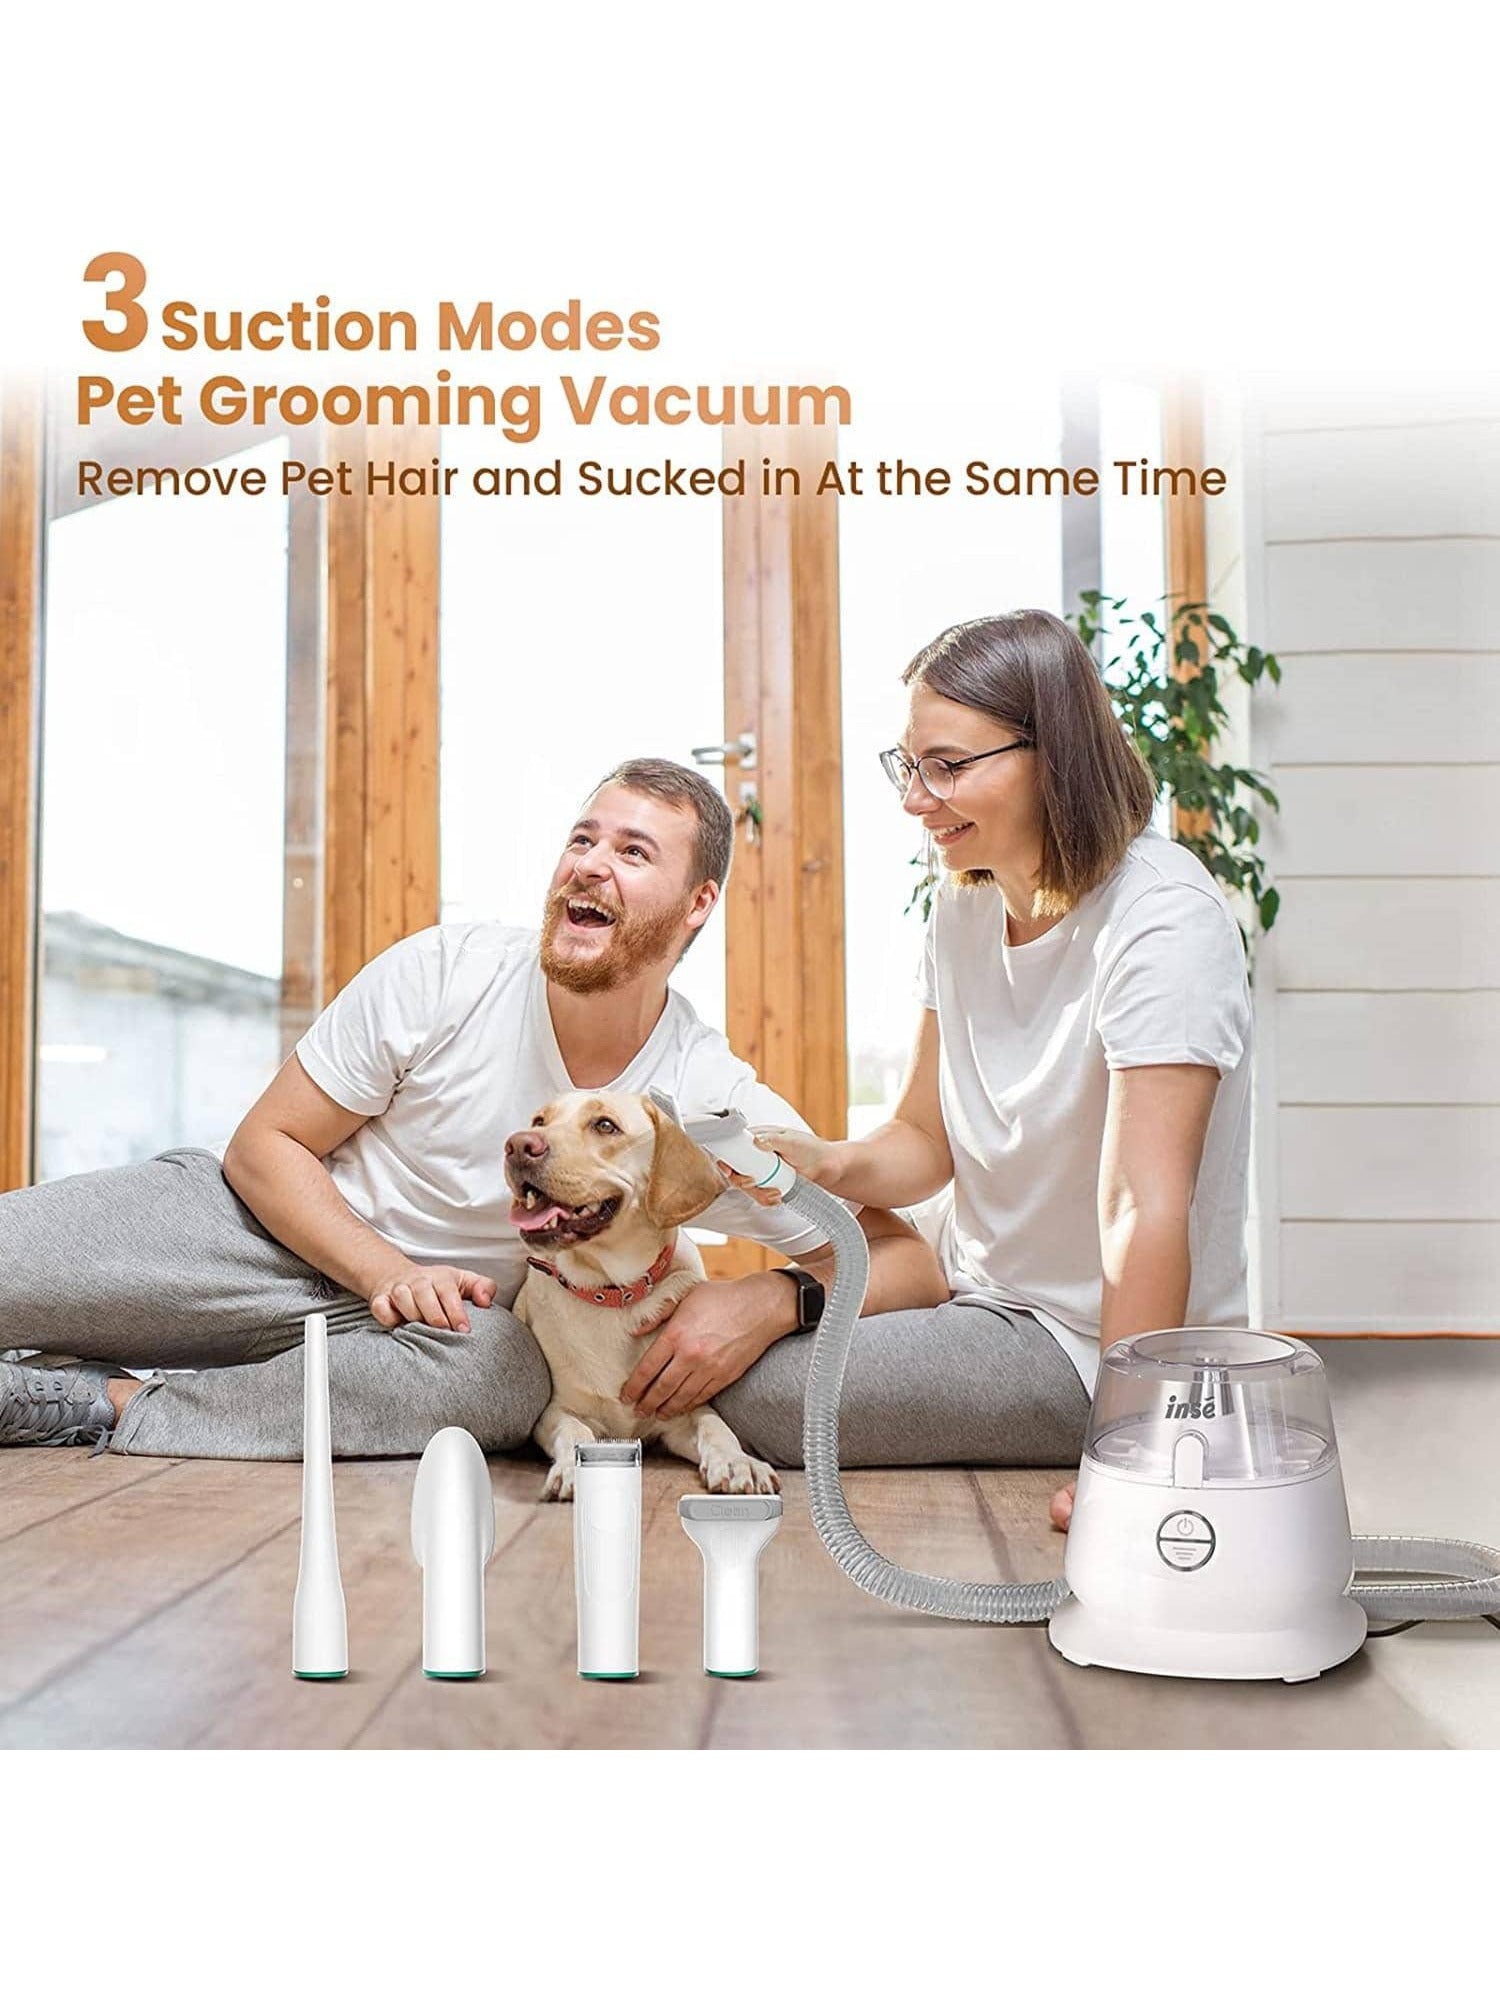 INSE P20 Pro Pet Grooming Vacuum & Dog Hair Vacuum Suck in 99% Pet Hair, Professional Dog Grooming Kit with 5 Grooming Tools,Large Easy Empty Dust Box, Dog Brush Vacuum for Shedding Dogs Cats Hair